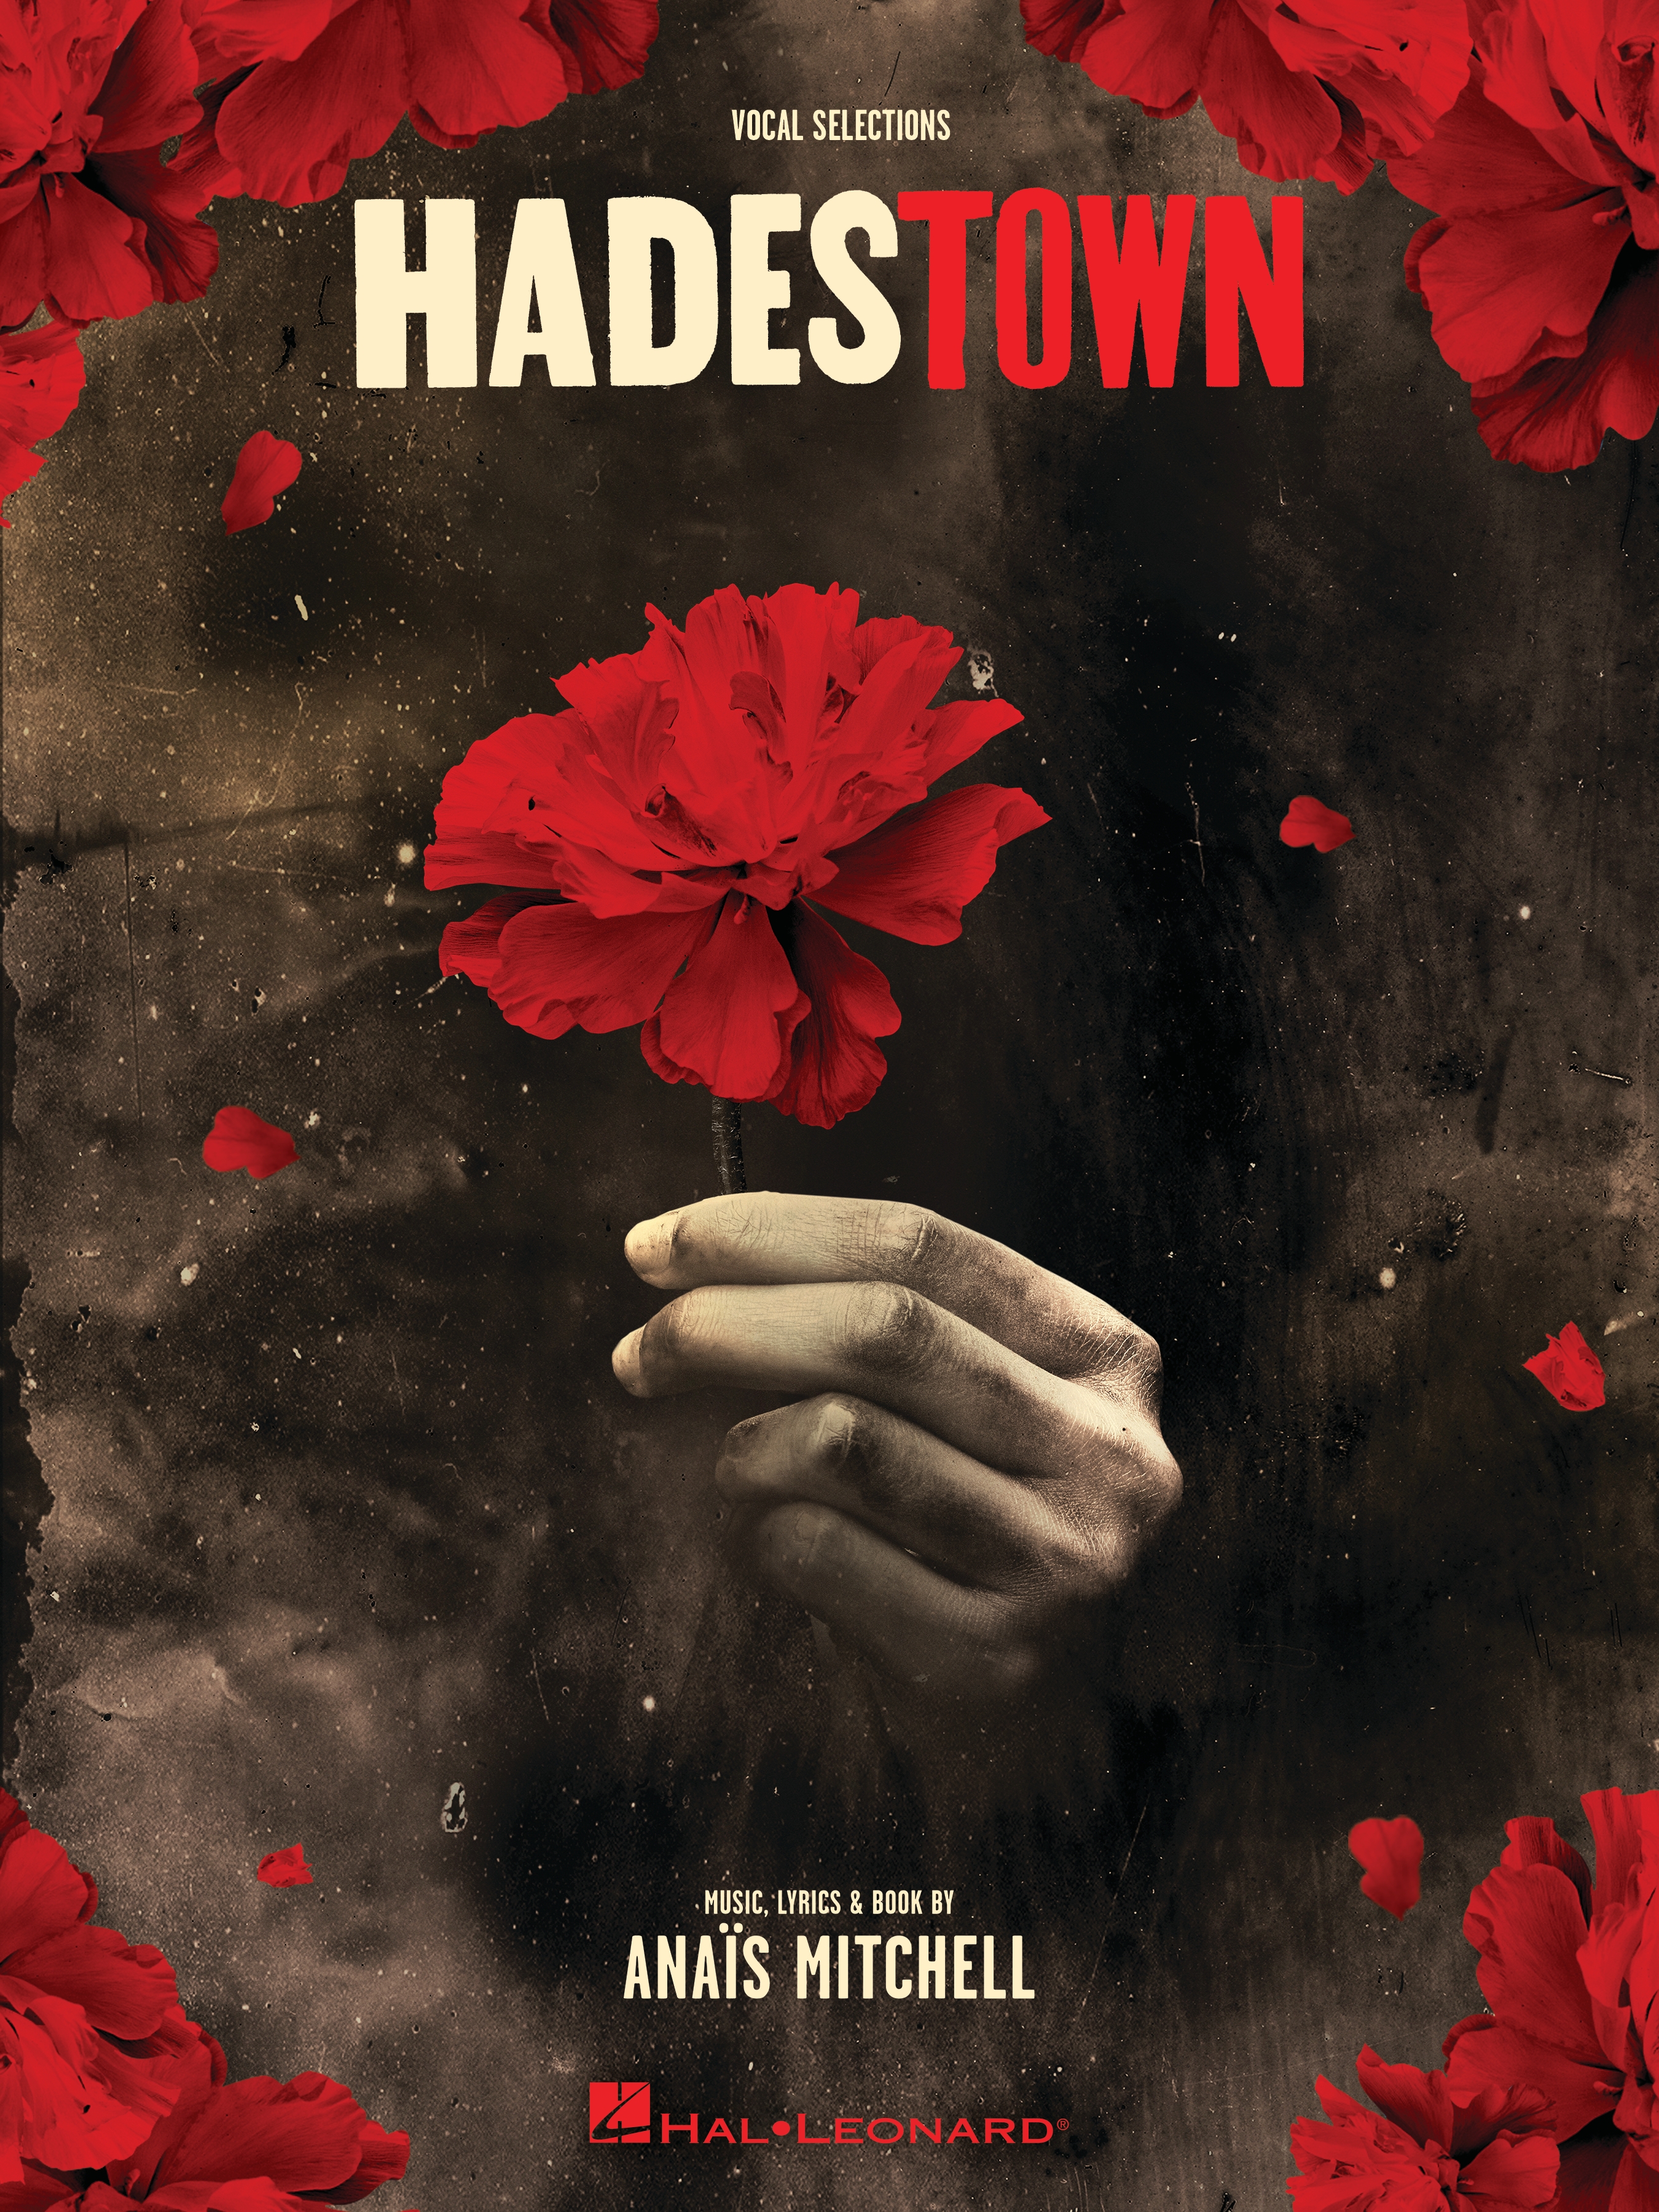 Hadestown library edition cover